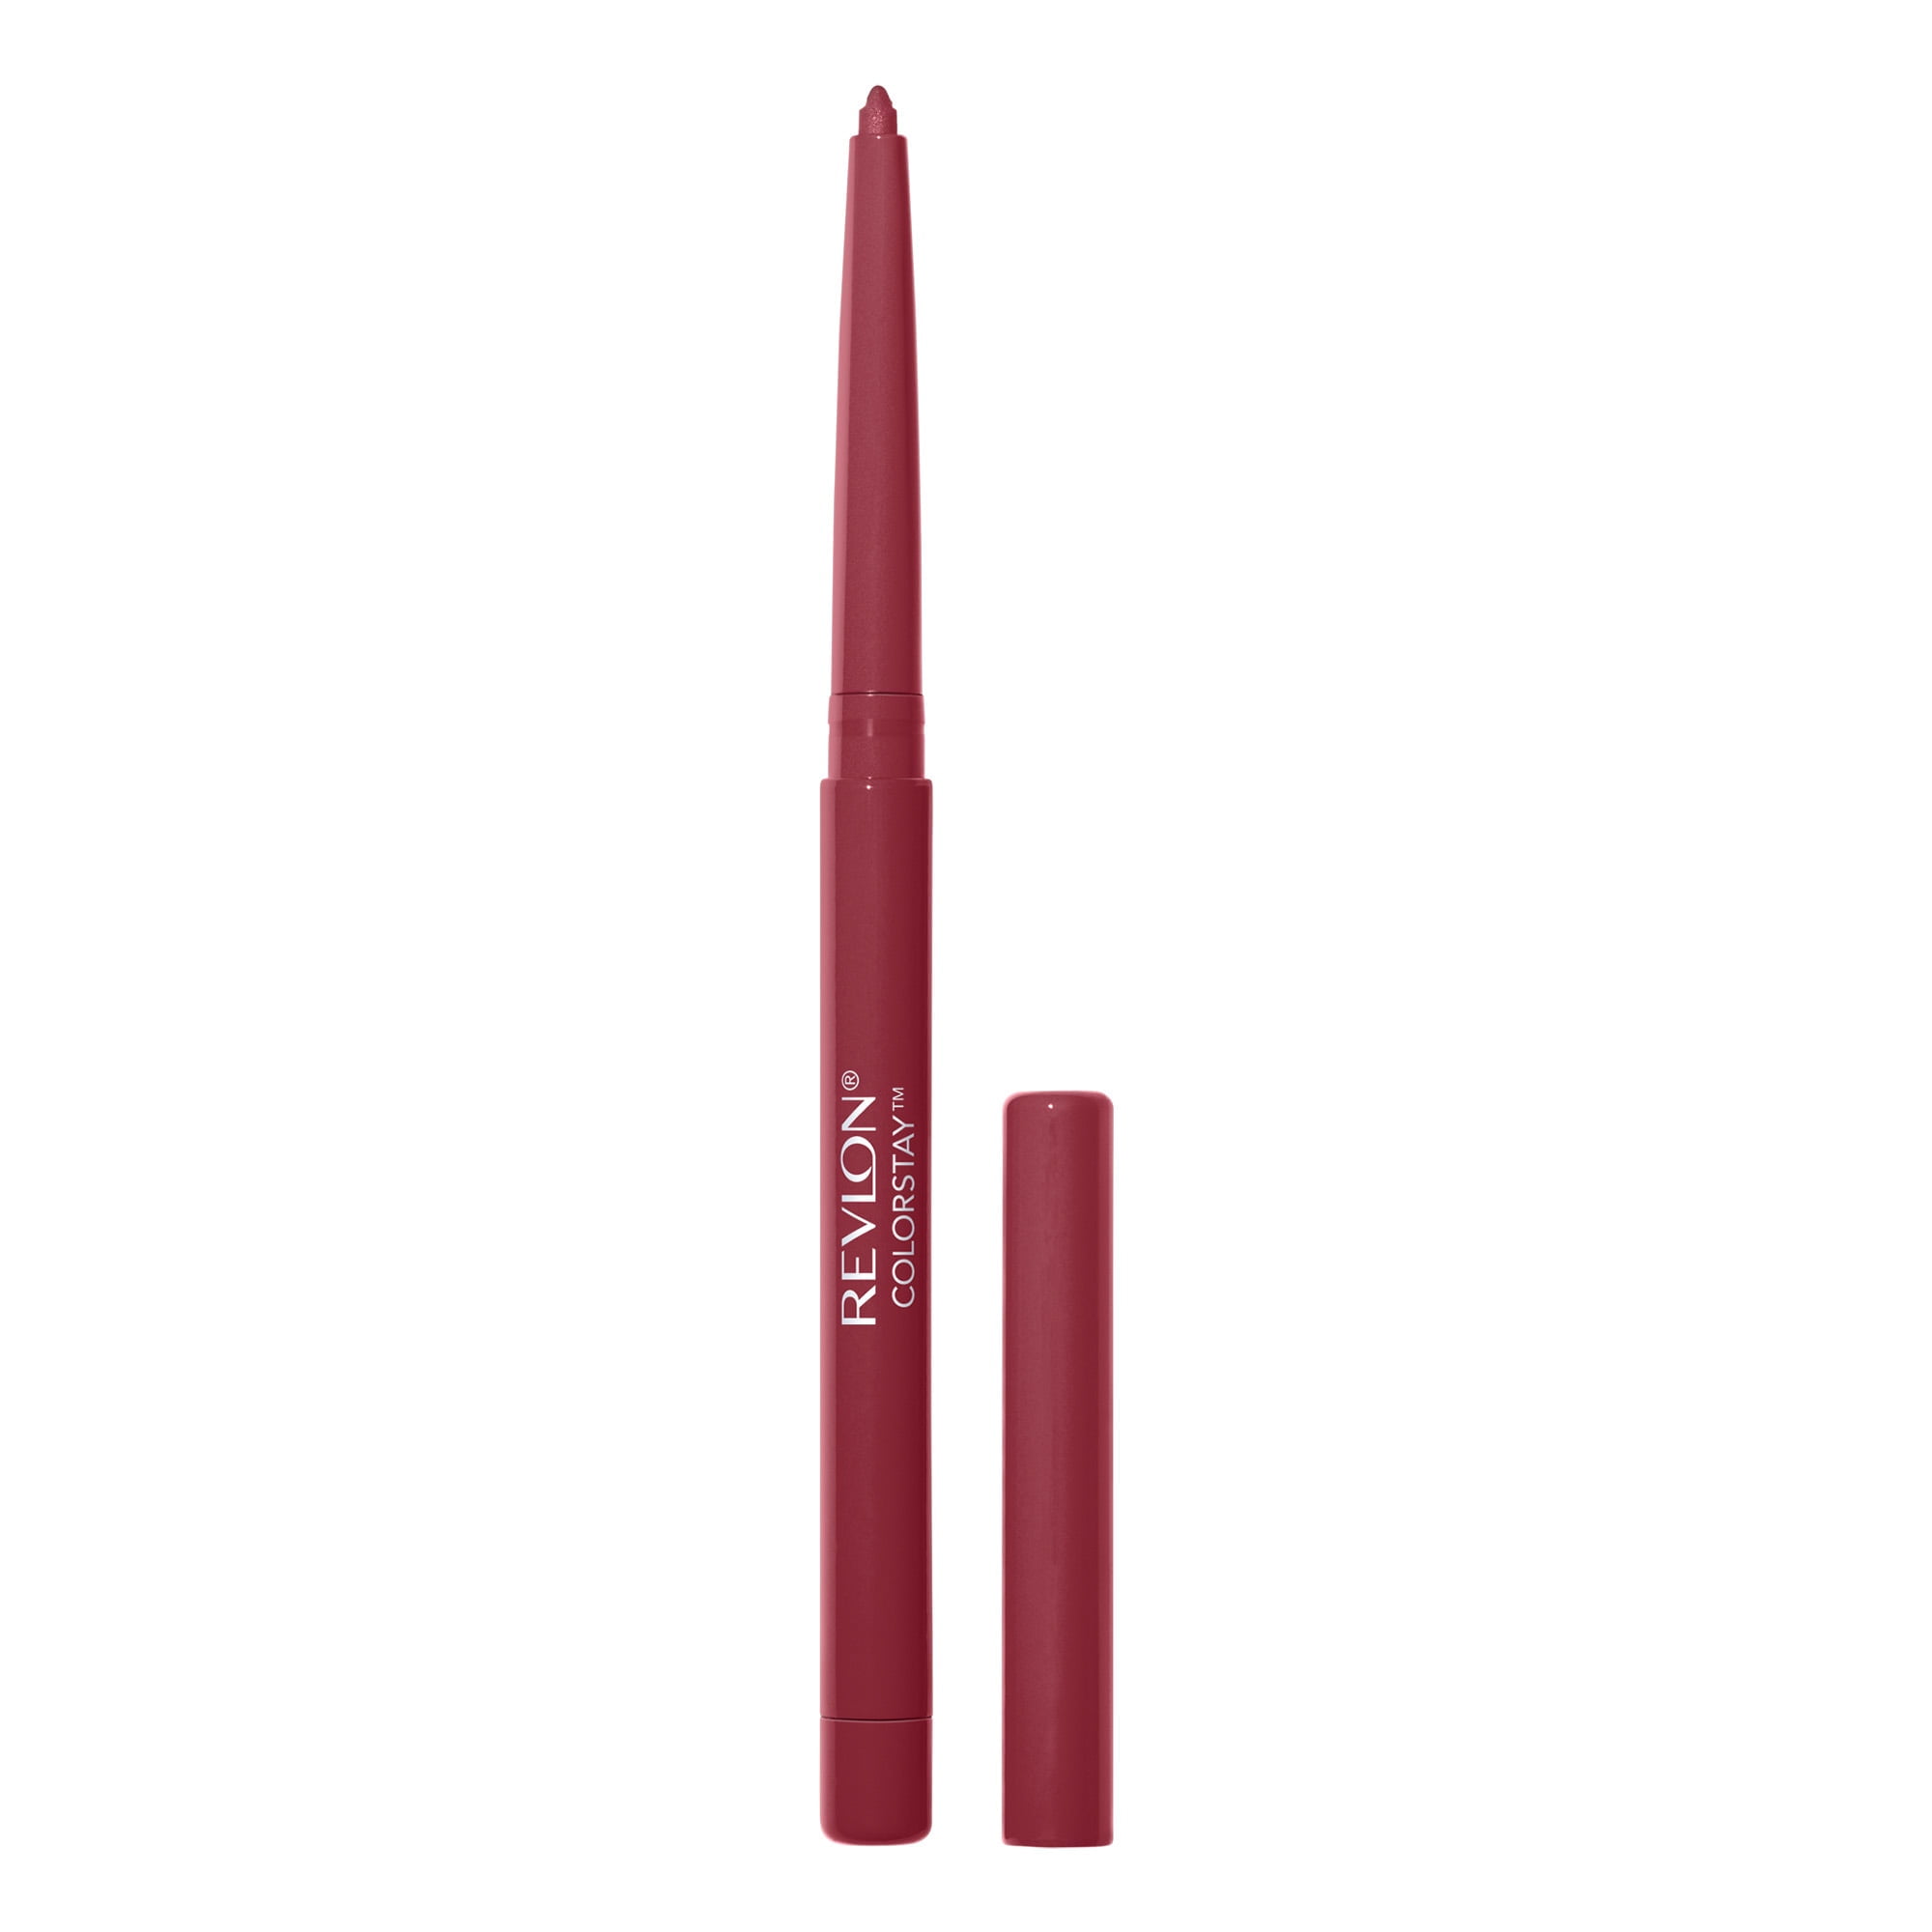 READY TO WEAR POWDER LIP LINER NUDE FULL SIZES 0.03 oz NEW